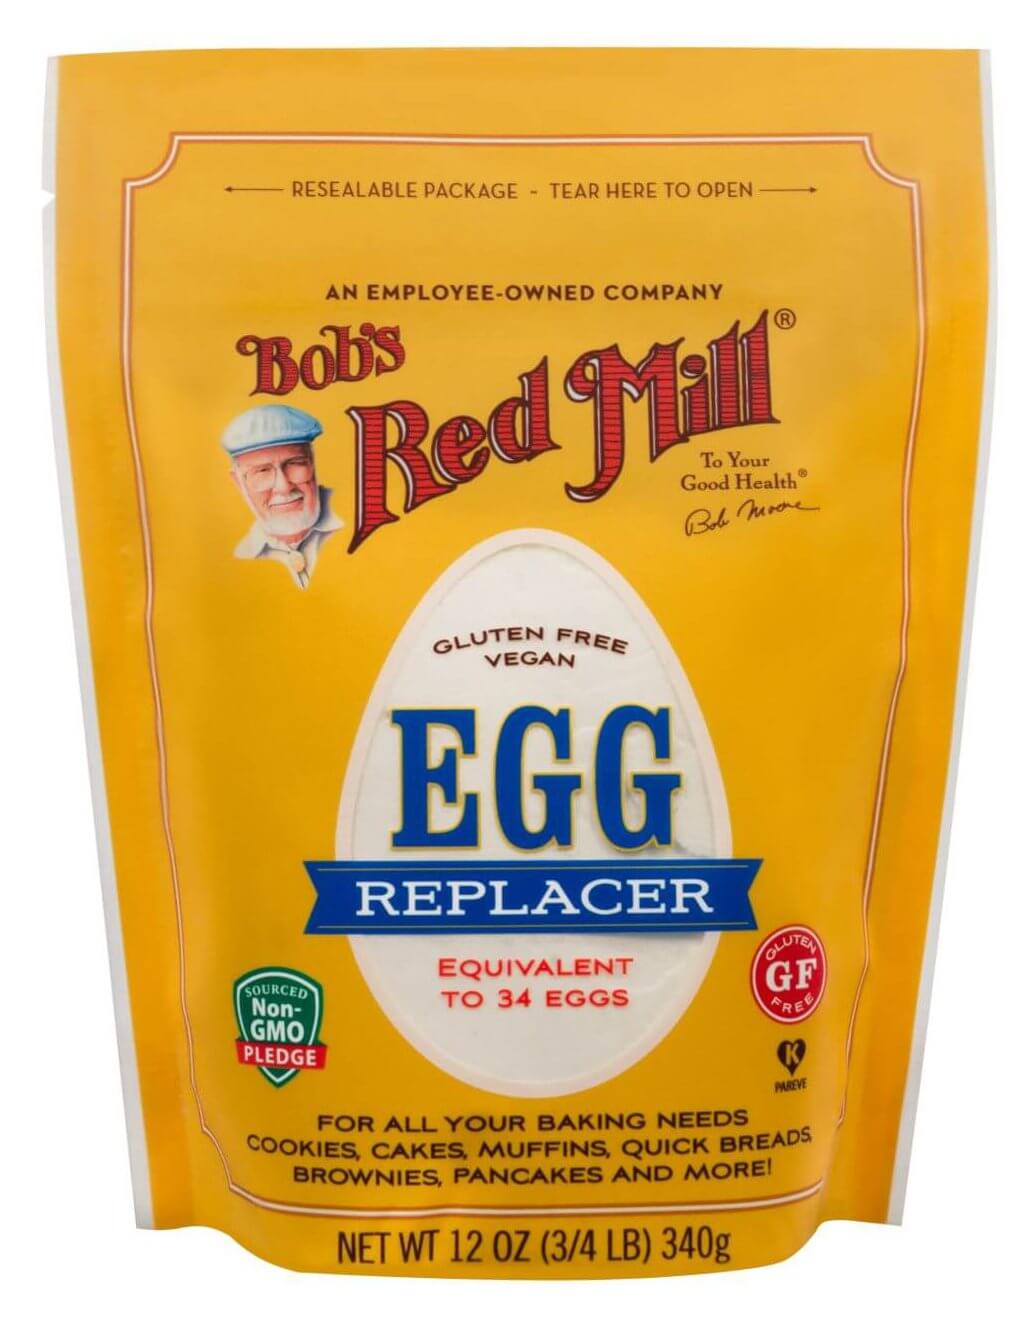 Bob’s Red Mill Egg Replacer is my go-to vegan substitute for eggs in most baking recipes